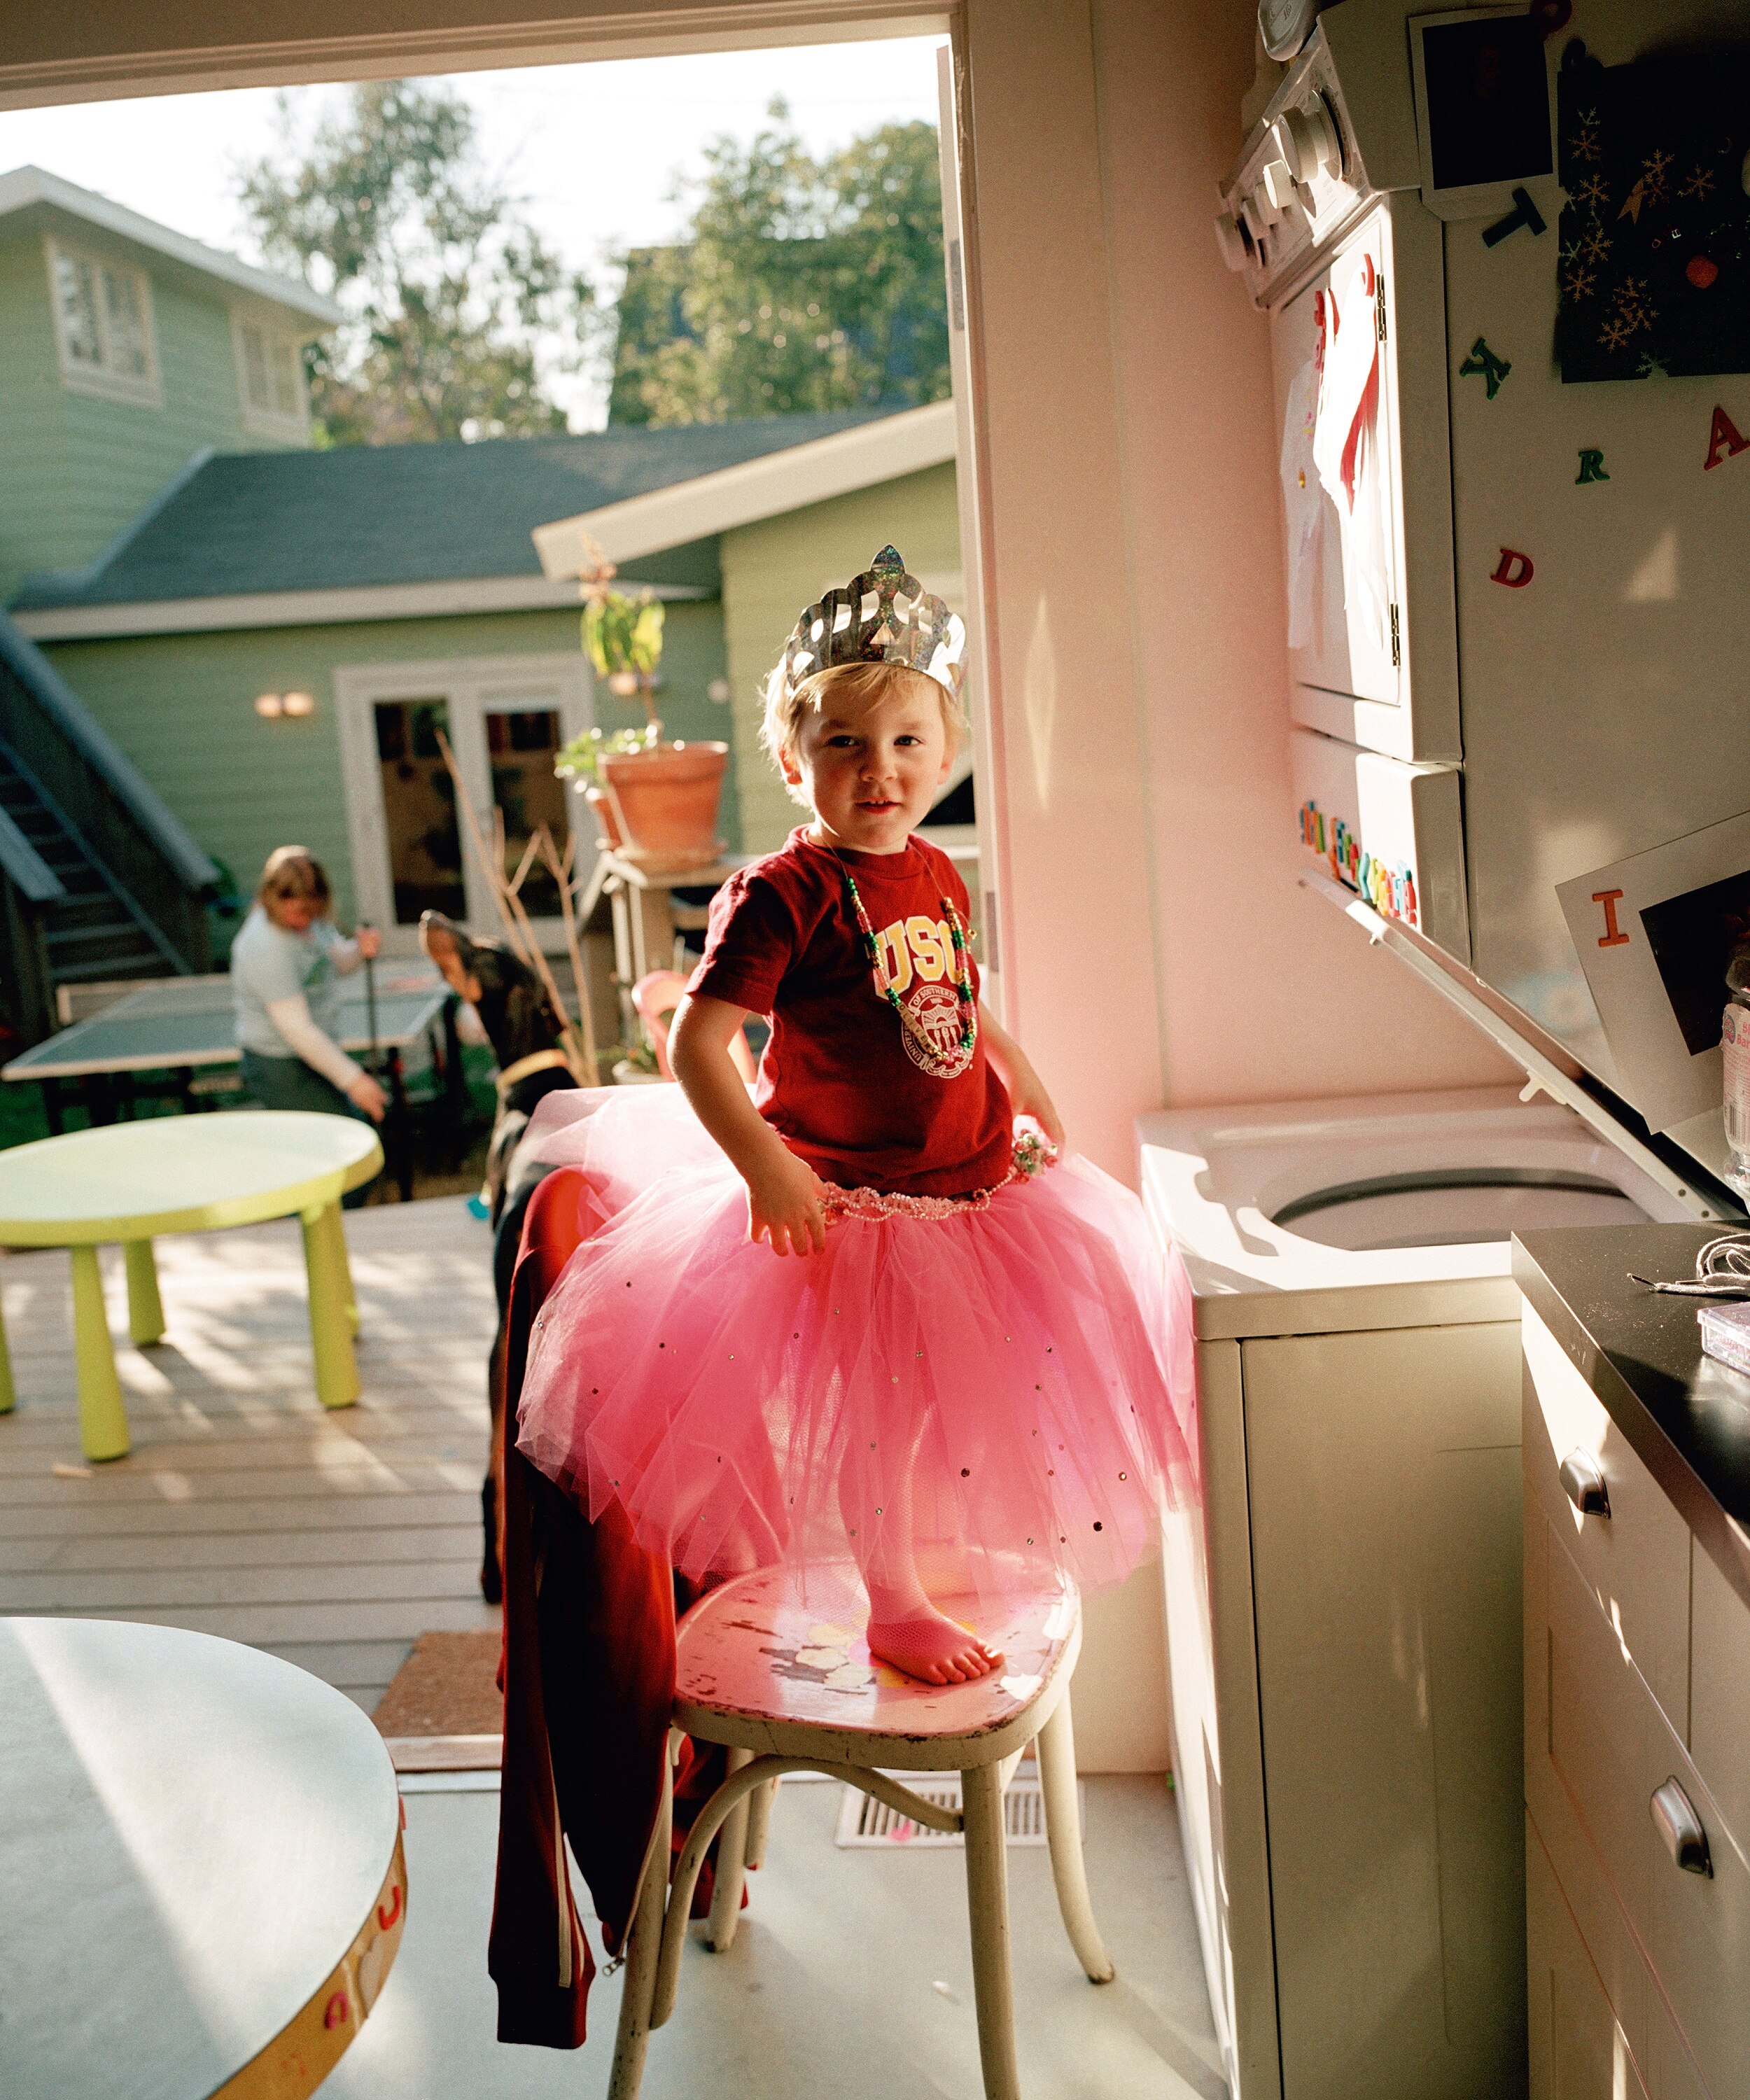 A blond-haired toddler wearing a t-shirt, tutu and tiara stands on a chair in front of a washing machine